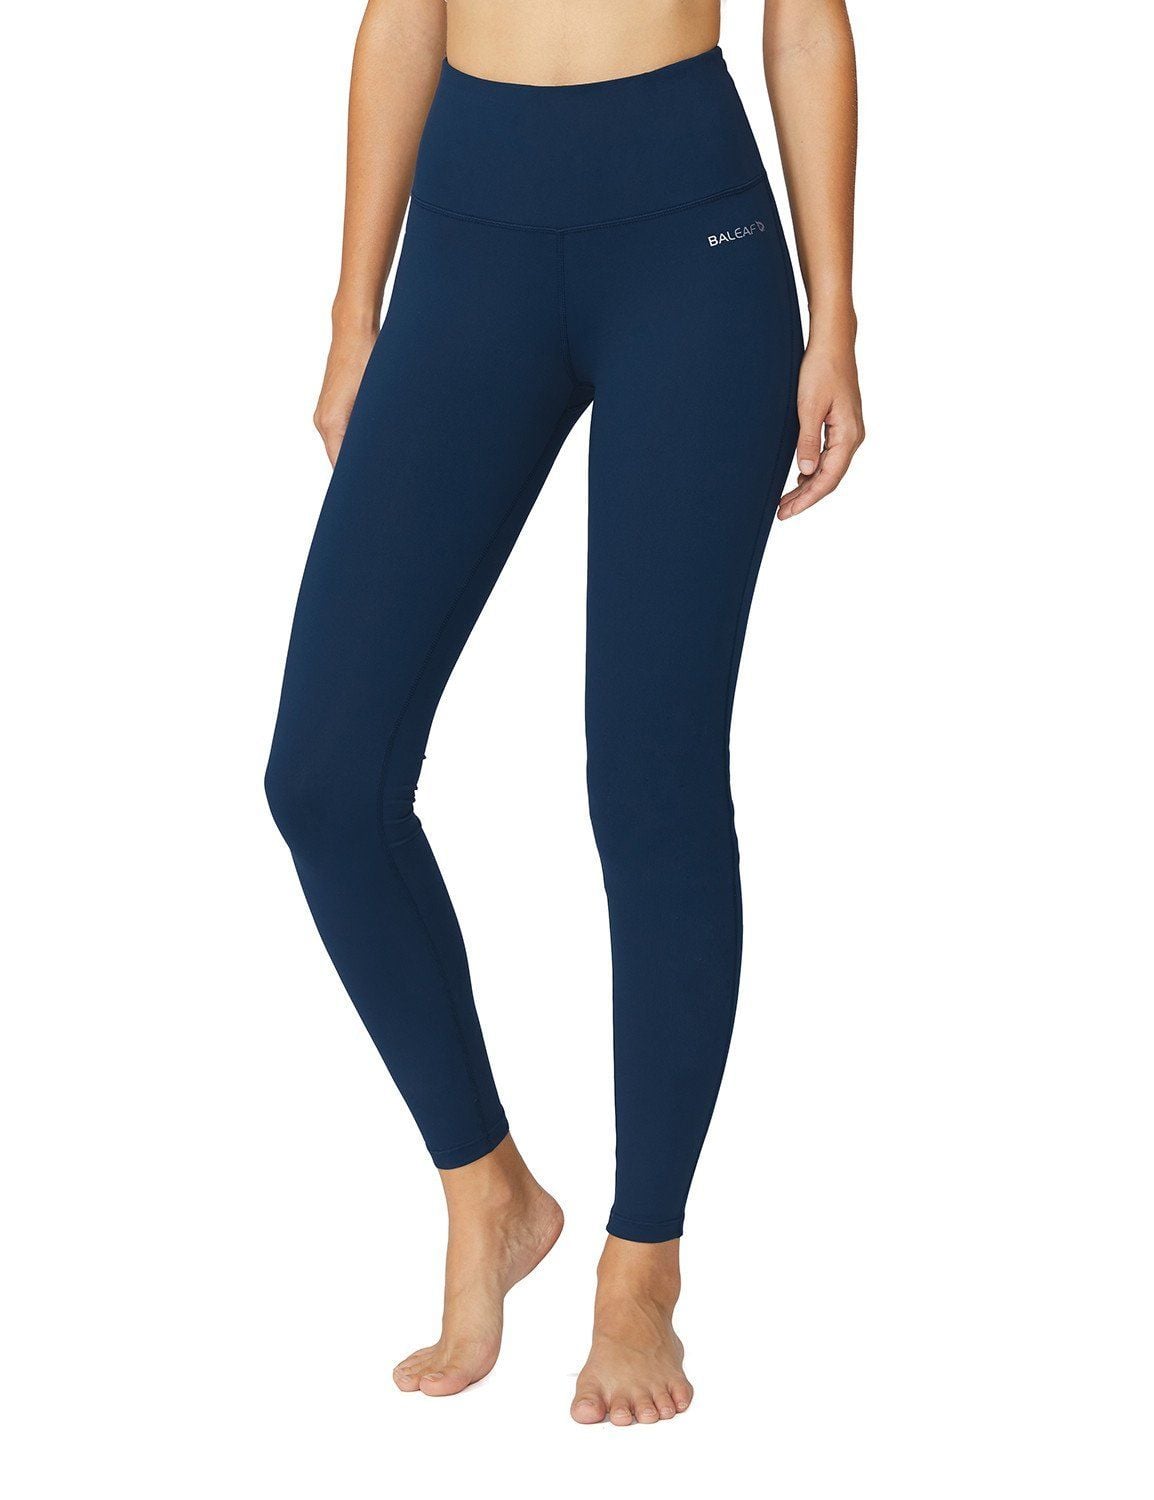 BALEAF SPORTS  Legging Review & Try-On 